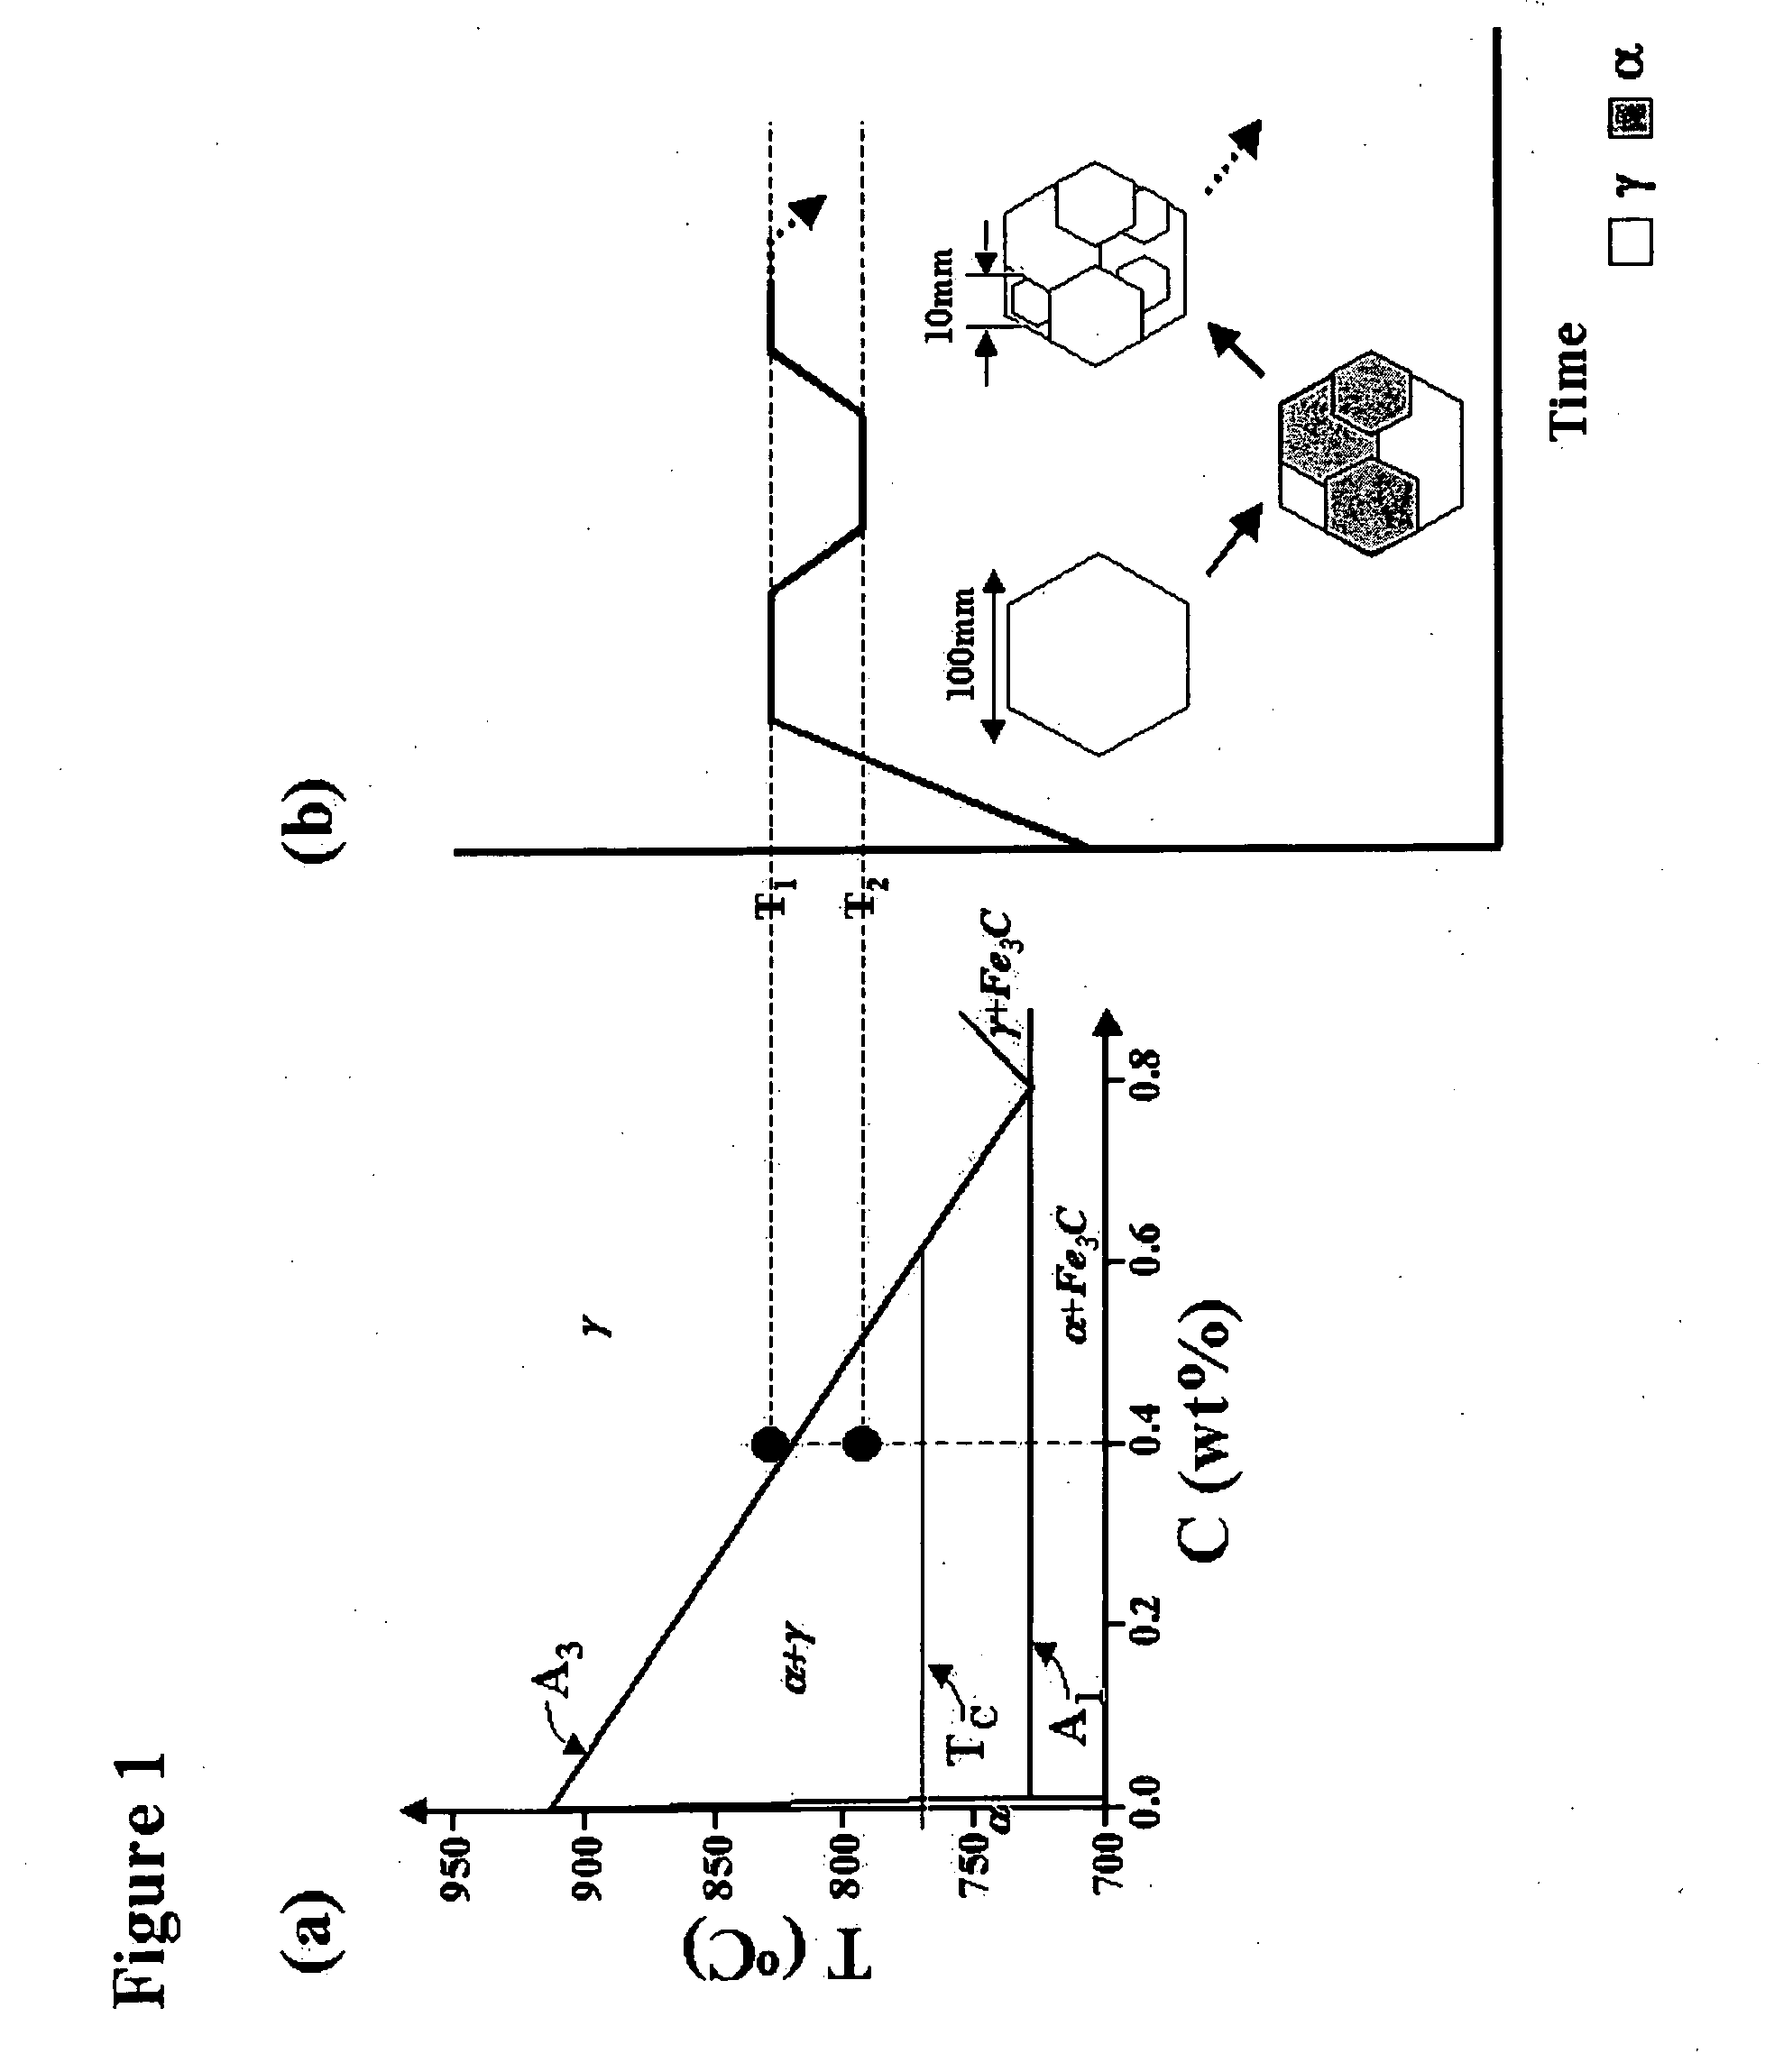 Grain refinement of alloys using magnetic field processing